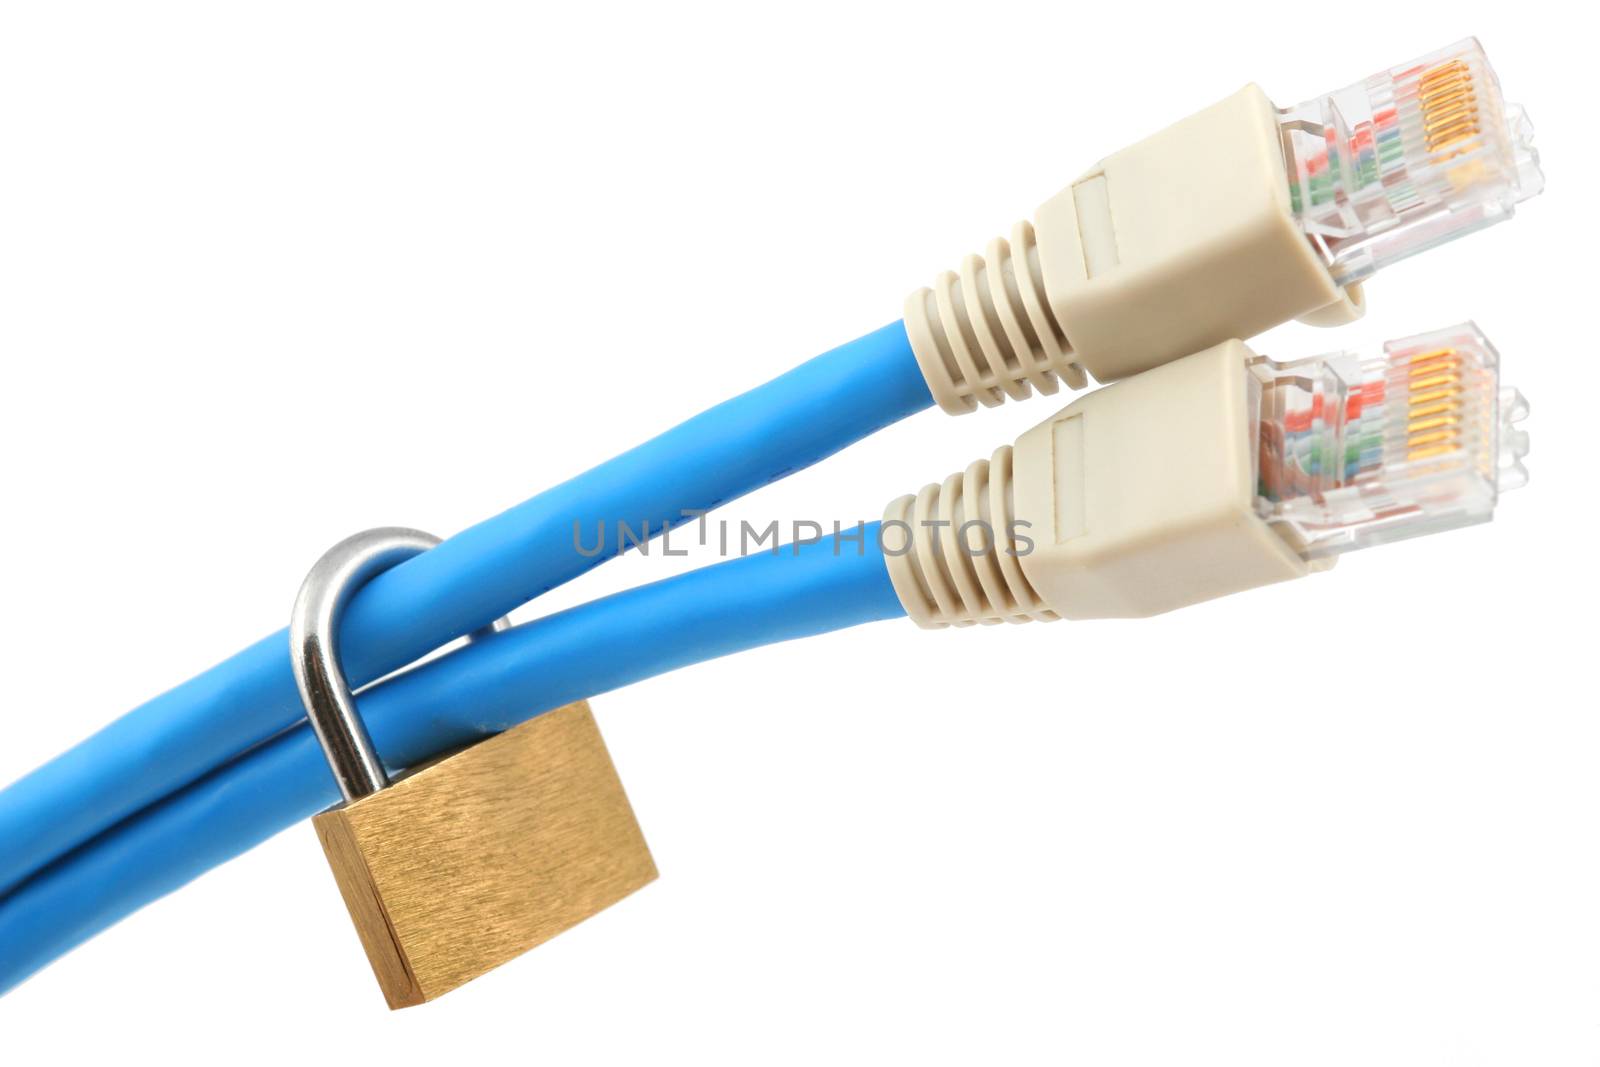 Two network cables secured with padlock (shallow DOF)